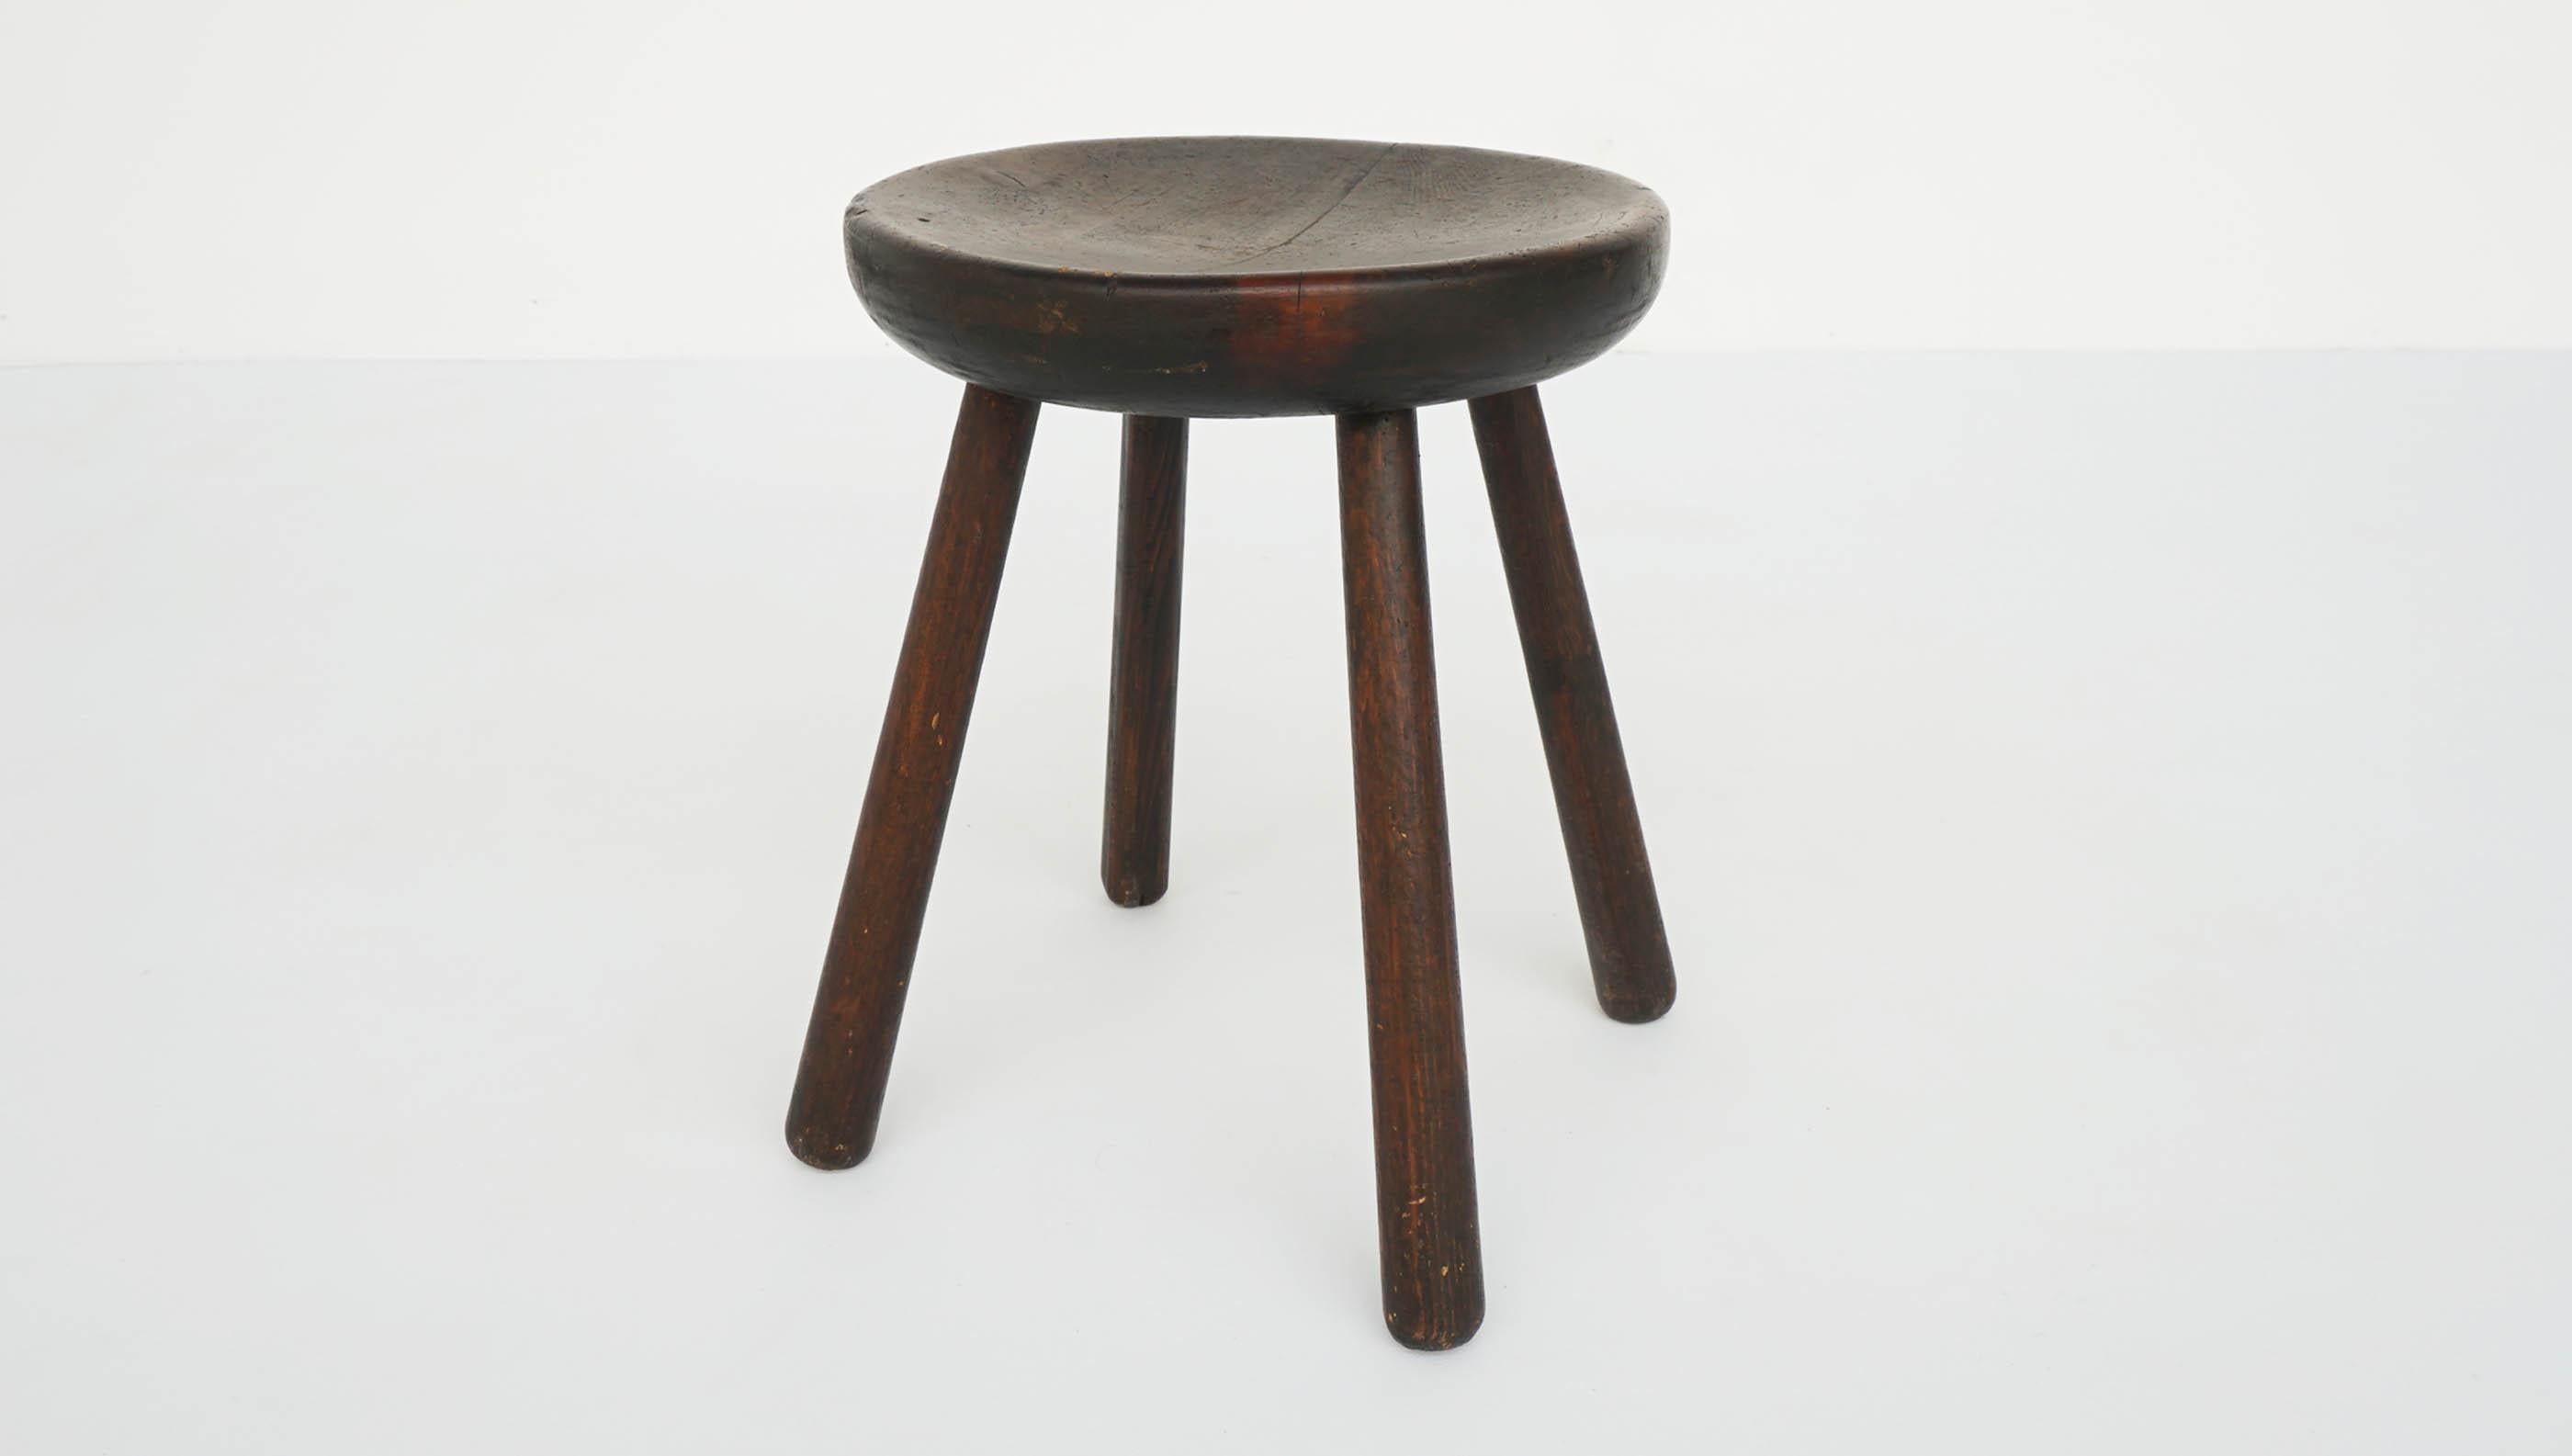 Beautiful lived-in stool, from Les Arcs Resort in France
Solid pine wood, dyed.